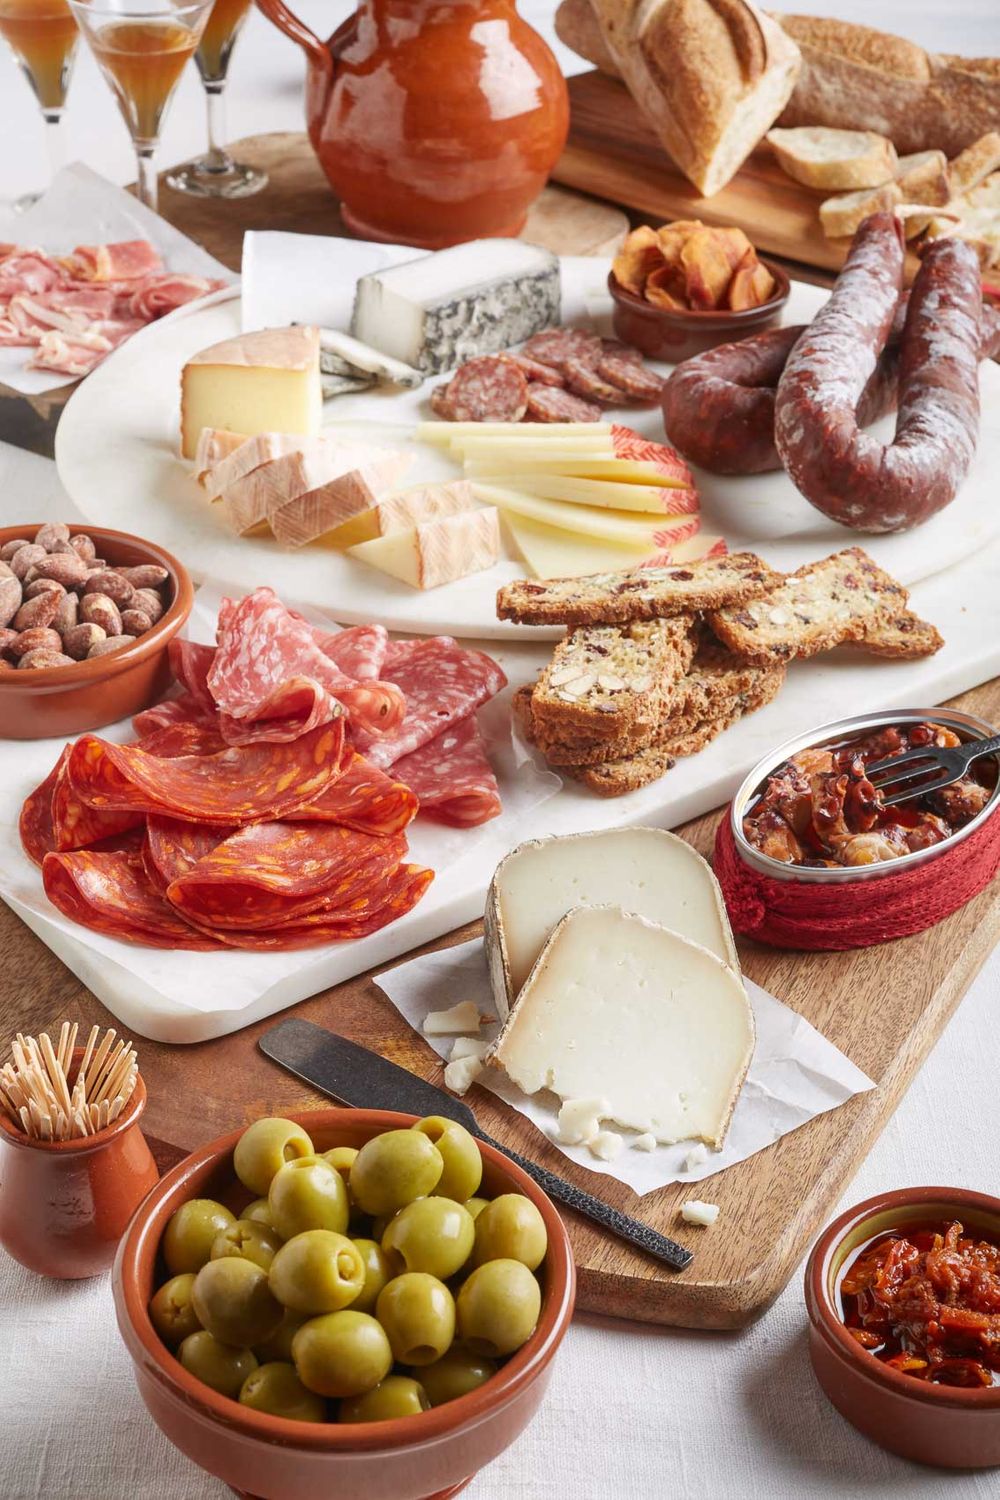 Spanish cured meats and cheeses